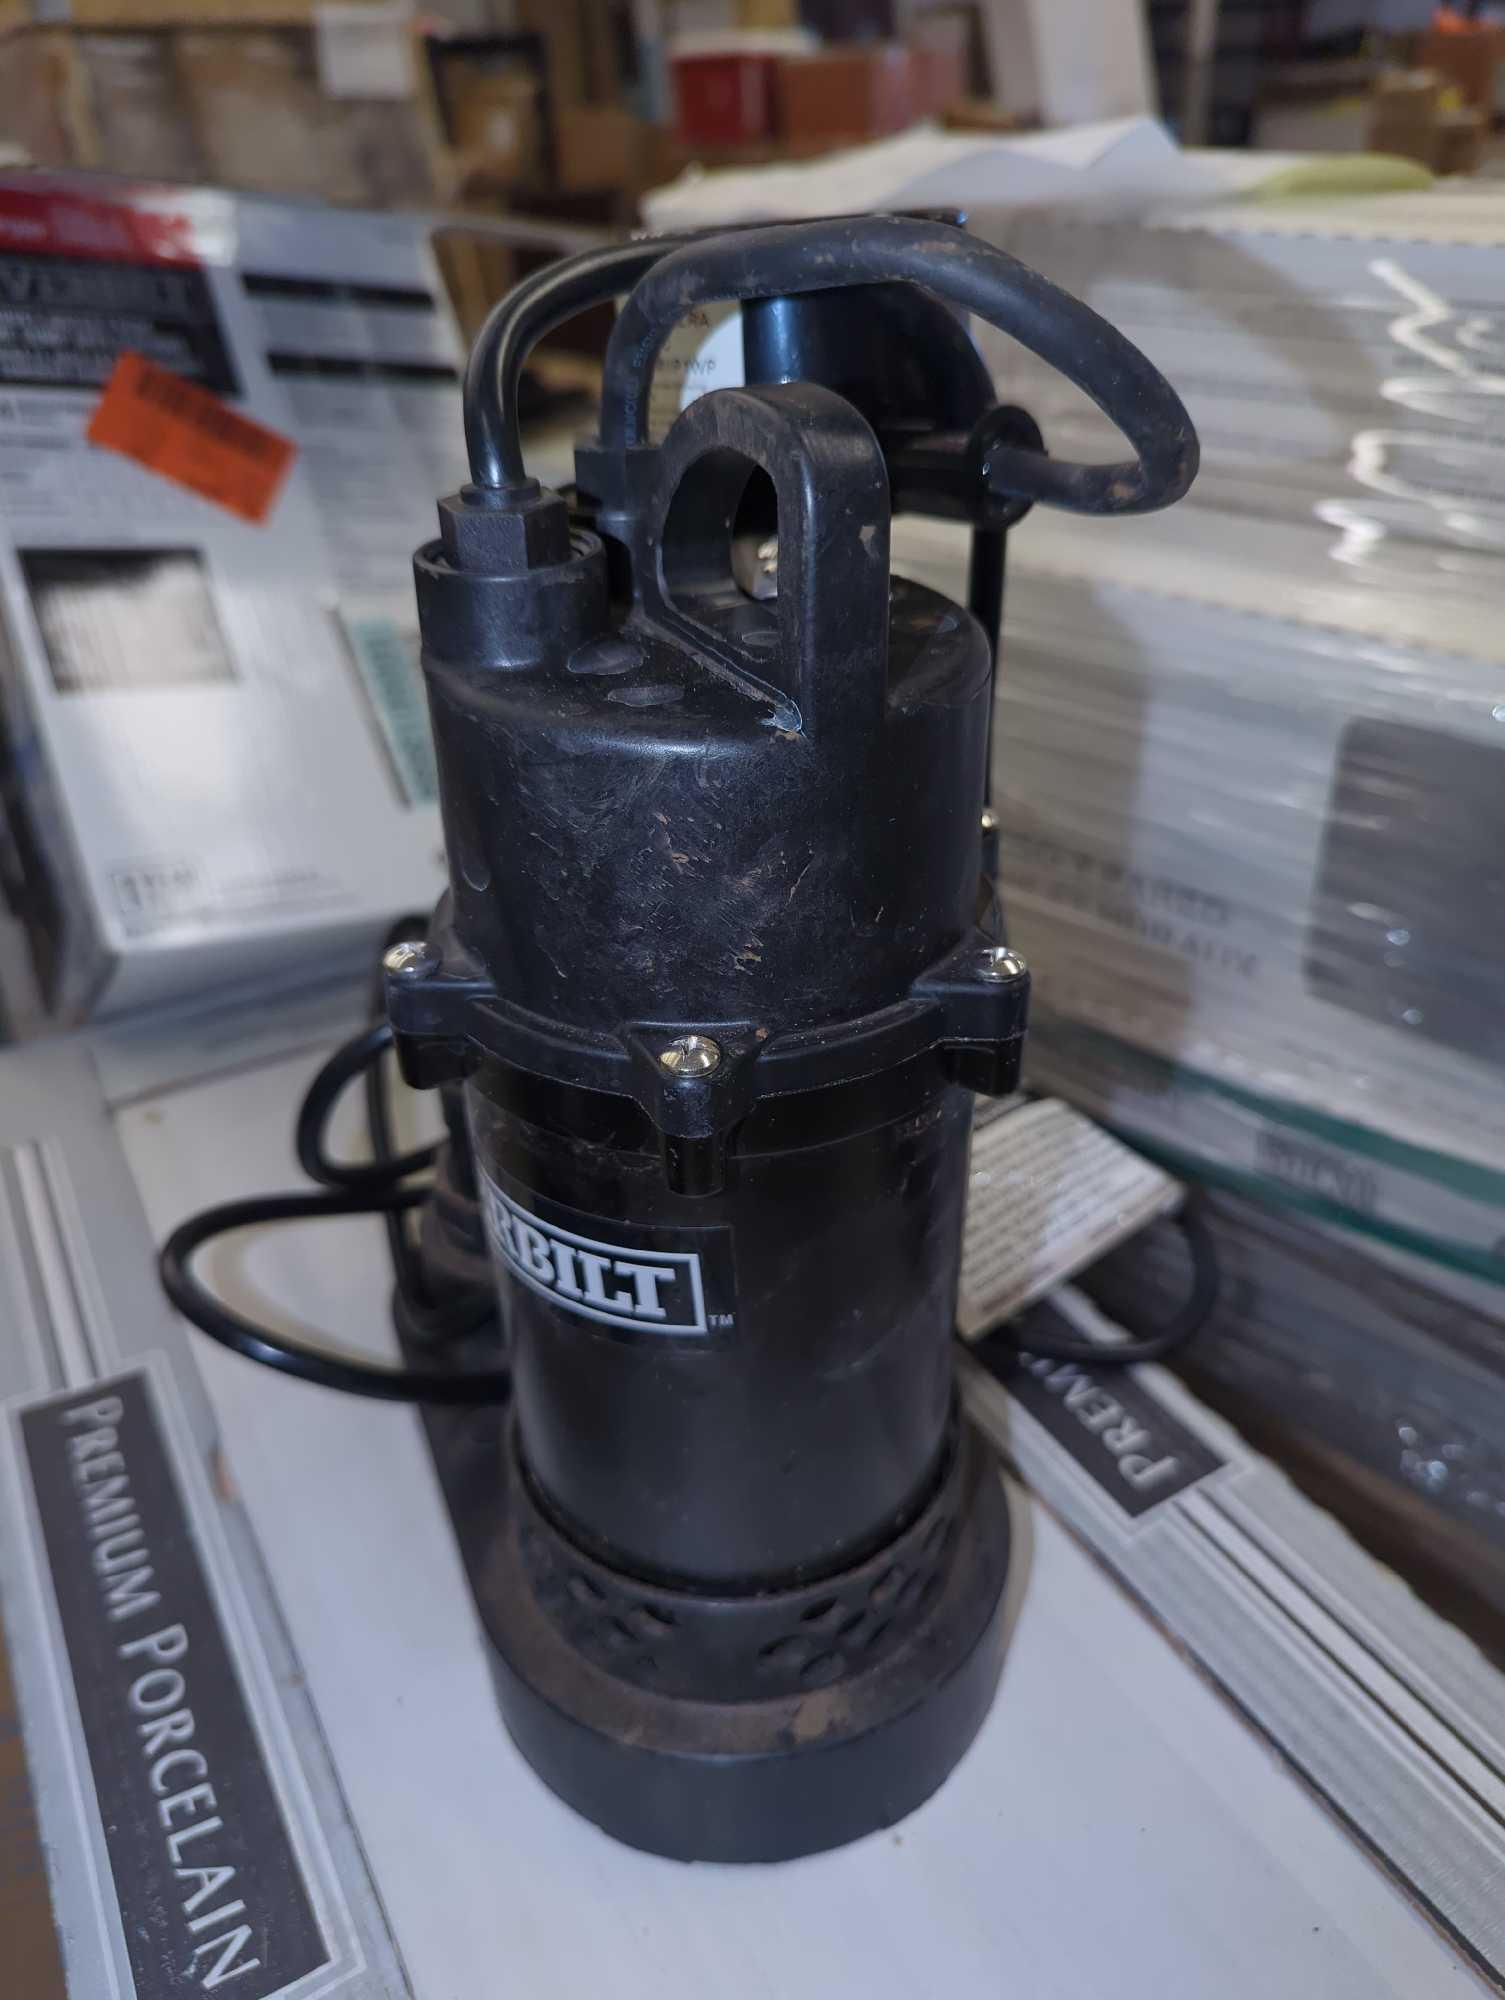 Everbilt 1/4 HP Aluminum Sump Pump Vertical Switch, Retail Price $99, Appears to be Used, What You